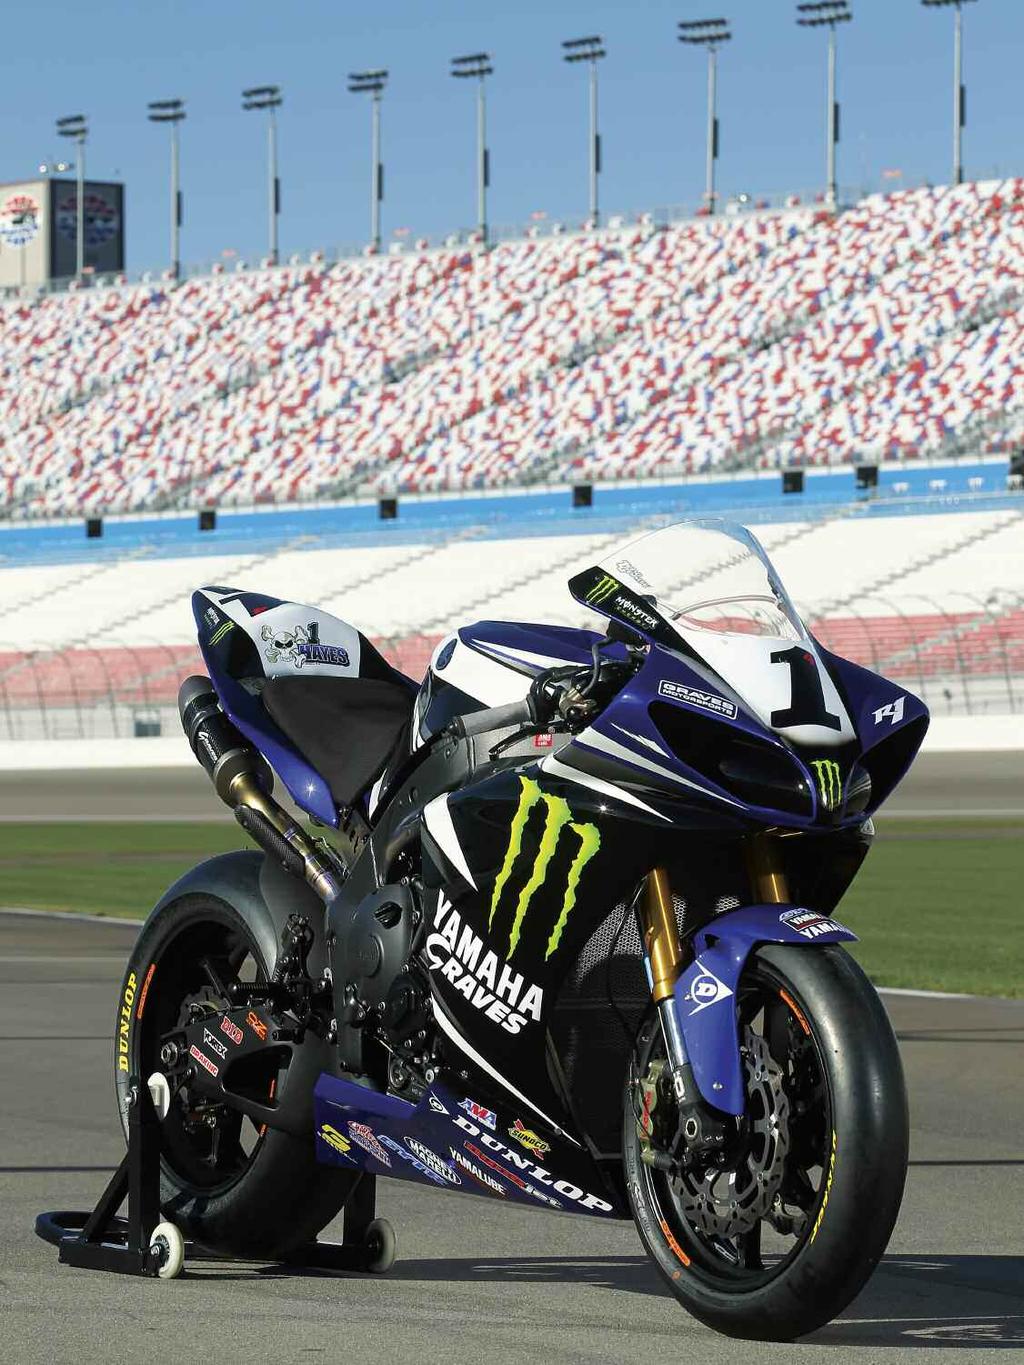 SUPERBIKE IN WOLF S CLOTHING: THE YAMAHA YZF-R1 The Yamaha YZF-R1 SuperBikes that two-time defending champion Josh Hayes and his teammate Josh Herrin compete on in AMA Pro Road Racing are based on